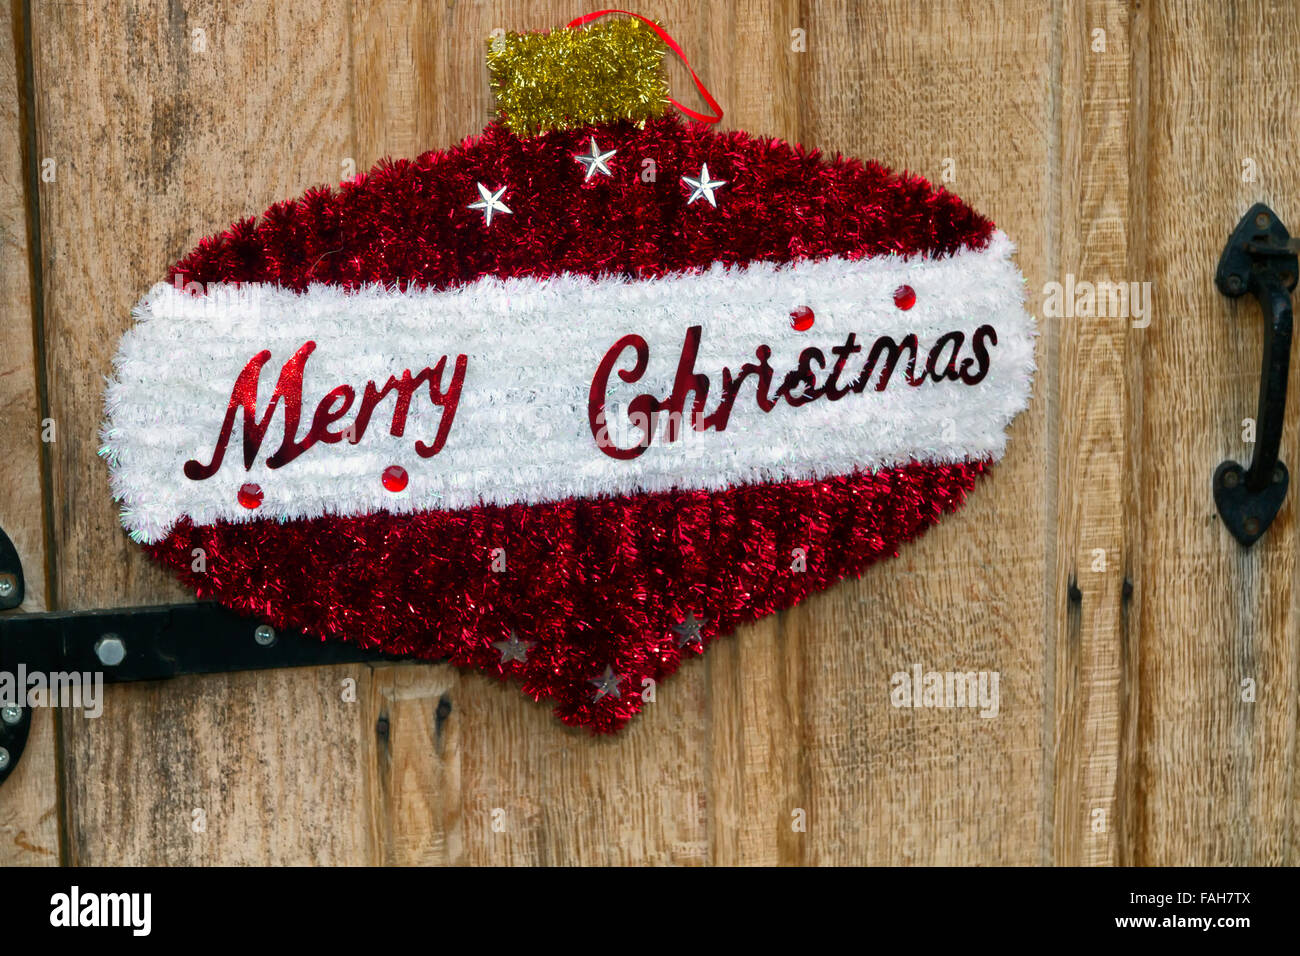 Merry Christmas sign in the shape  of a Christmas ball ornament on a wooden door Stock Photo